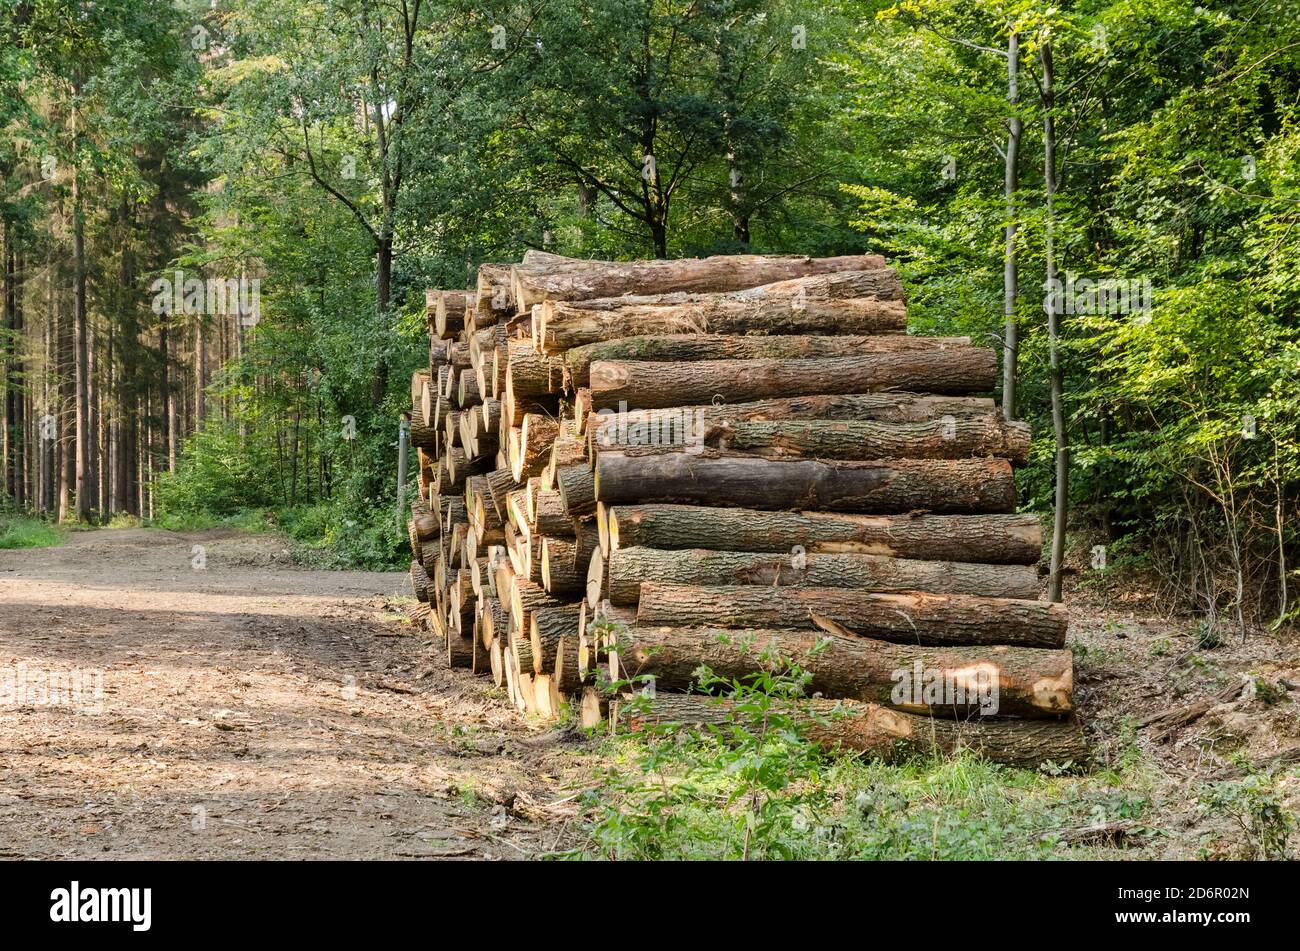 Deforestation, pile or stack of felled trees, timber harvest, fire wood logs in the forest in Rhineland-Palatinate, Germany, Western Europe Stock Photo